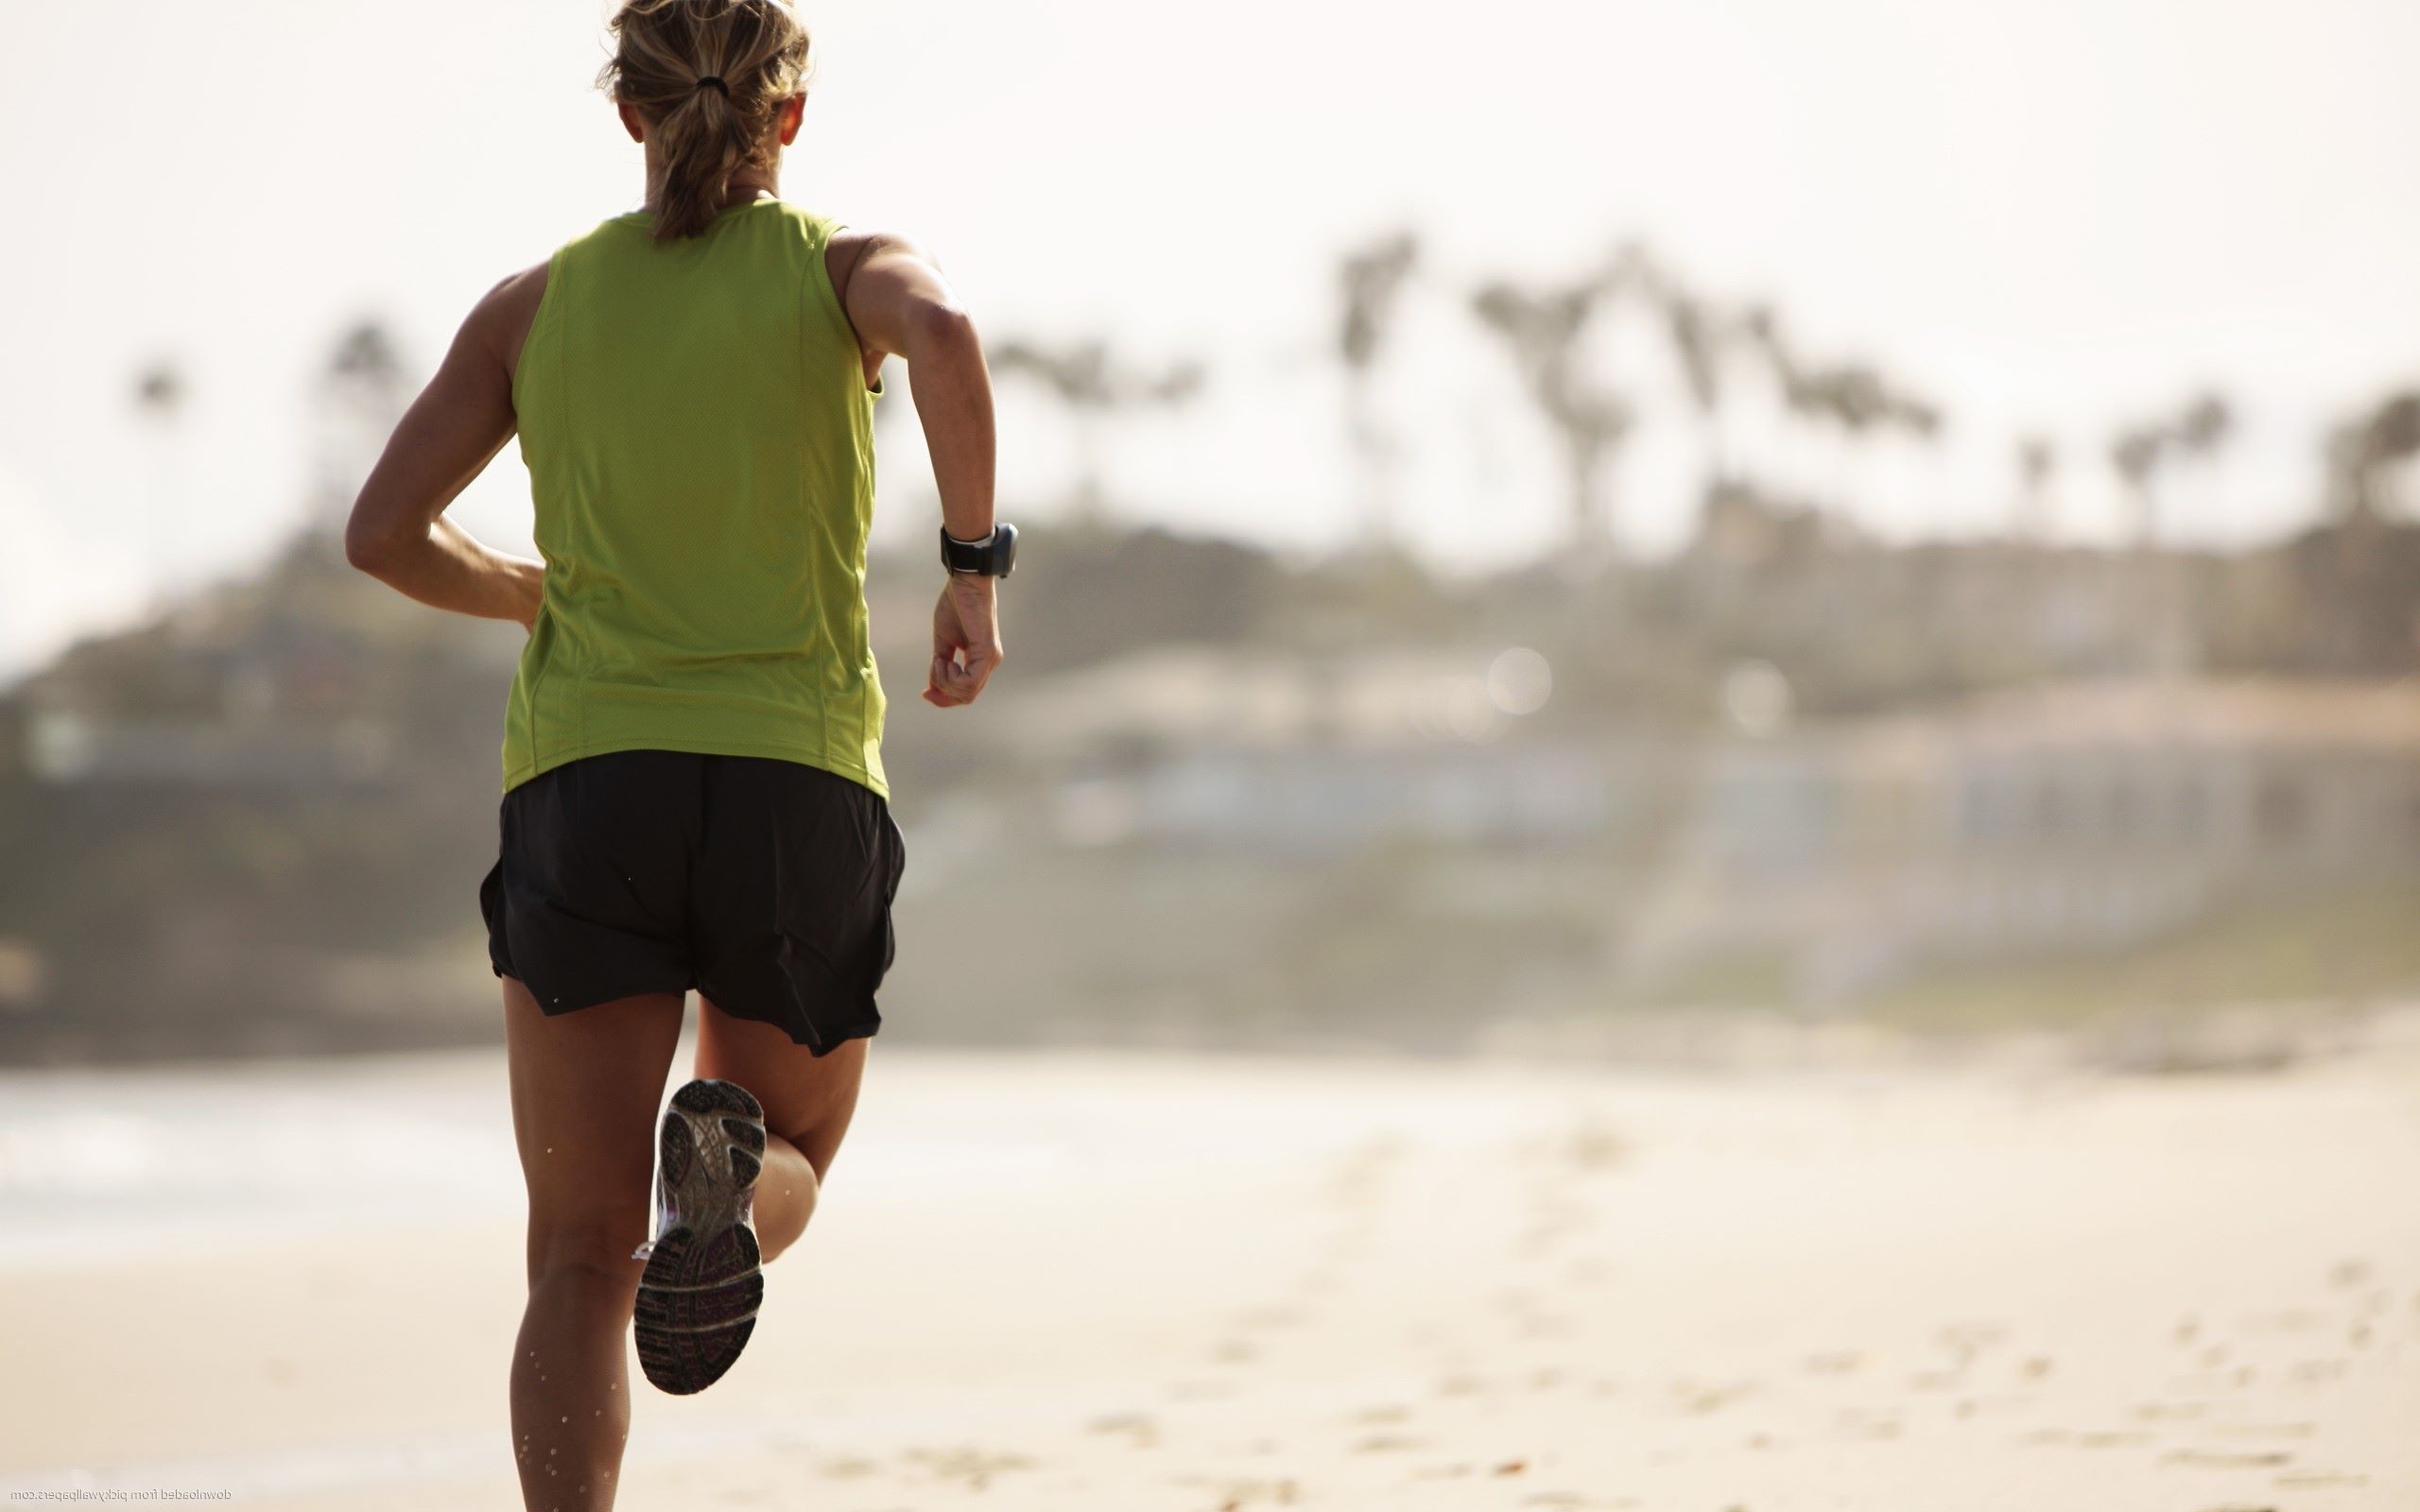 A Beginner’s 10-Week Plan For Walking, Jogging, And Running